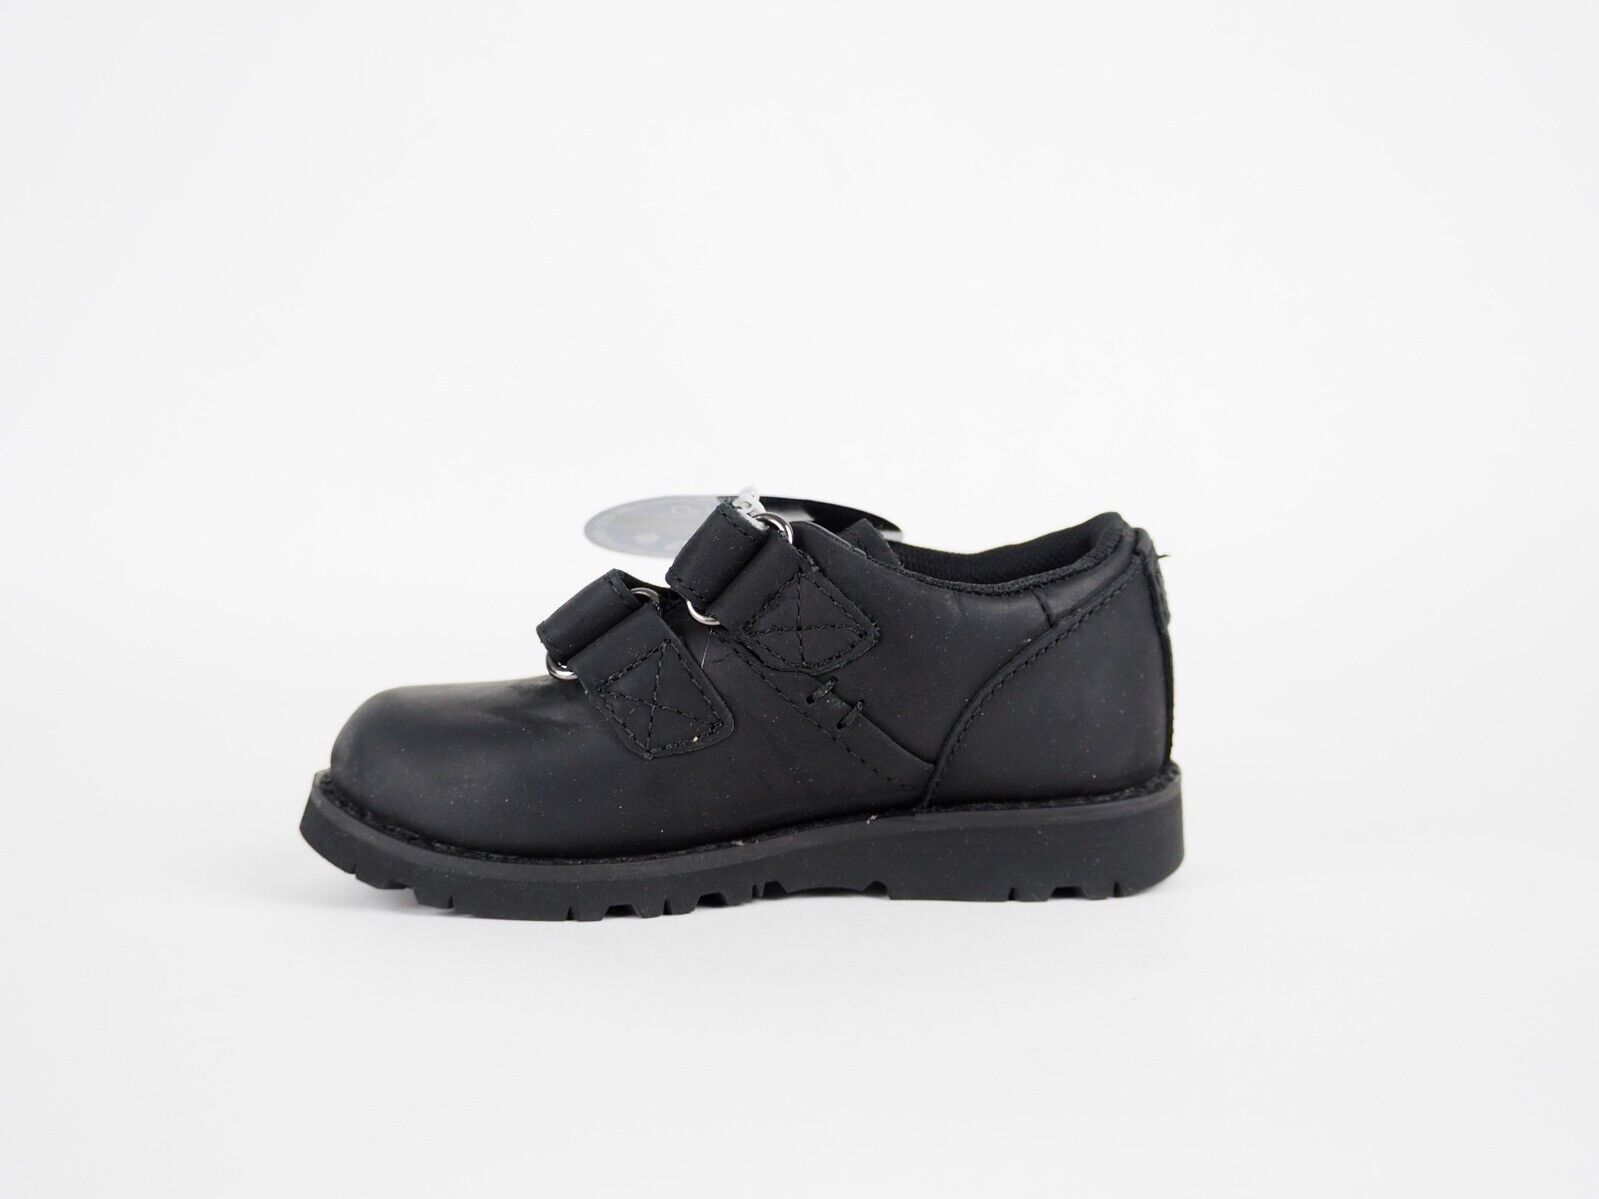 Infants Timberland Earthkeepers 5584R Black Leather 2 Strap Smart Baby Shoes - London Top Style